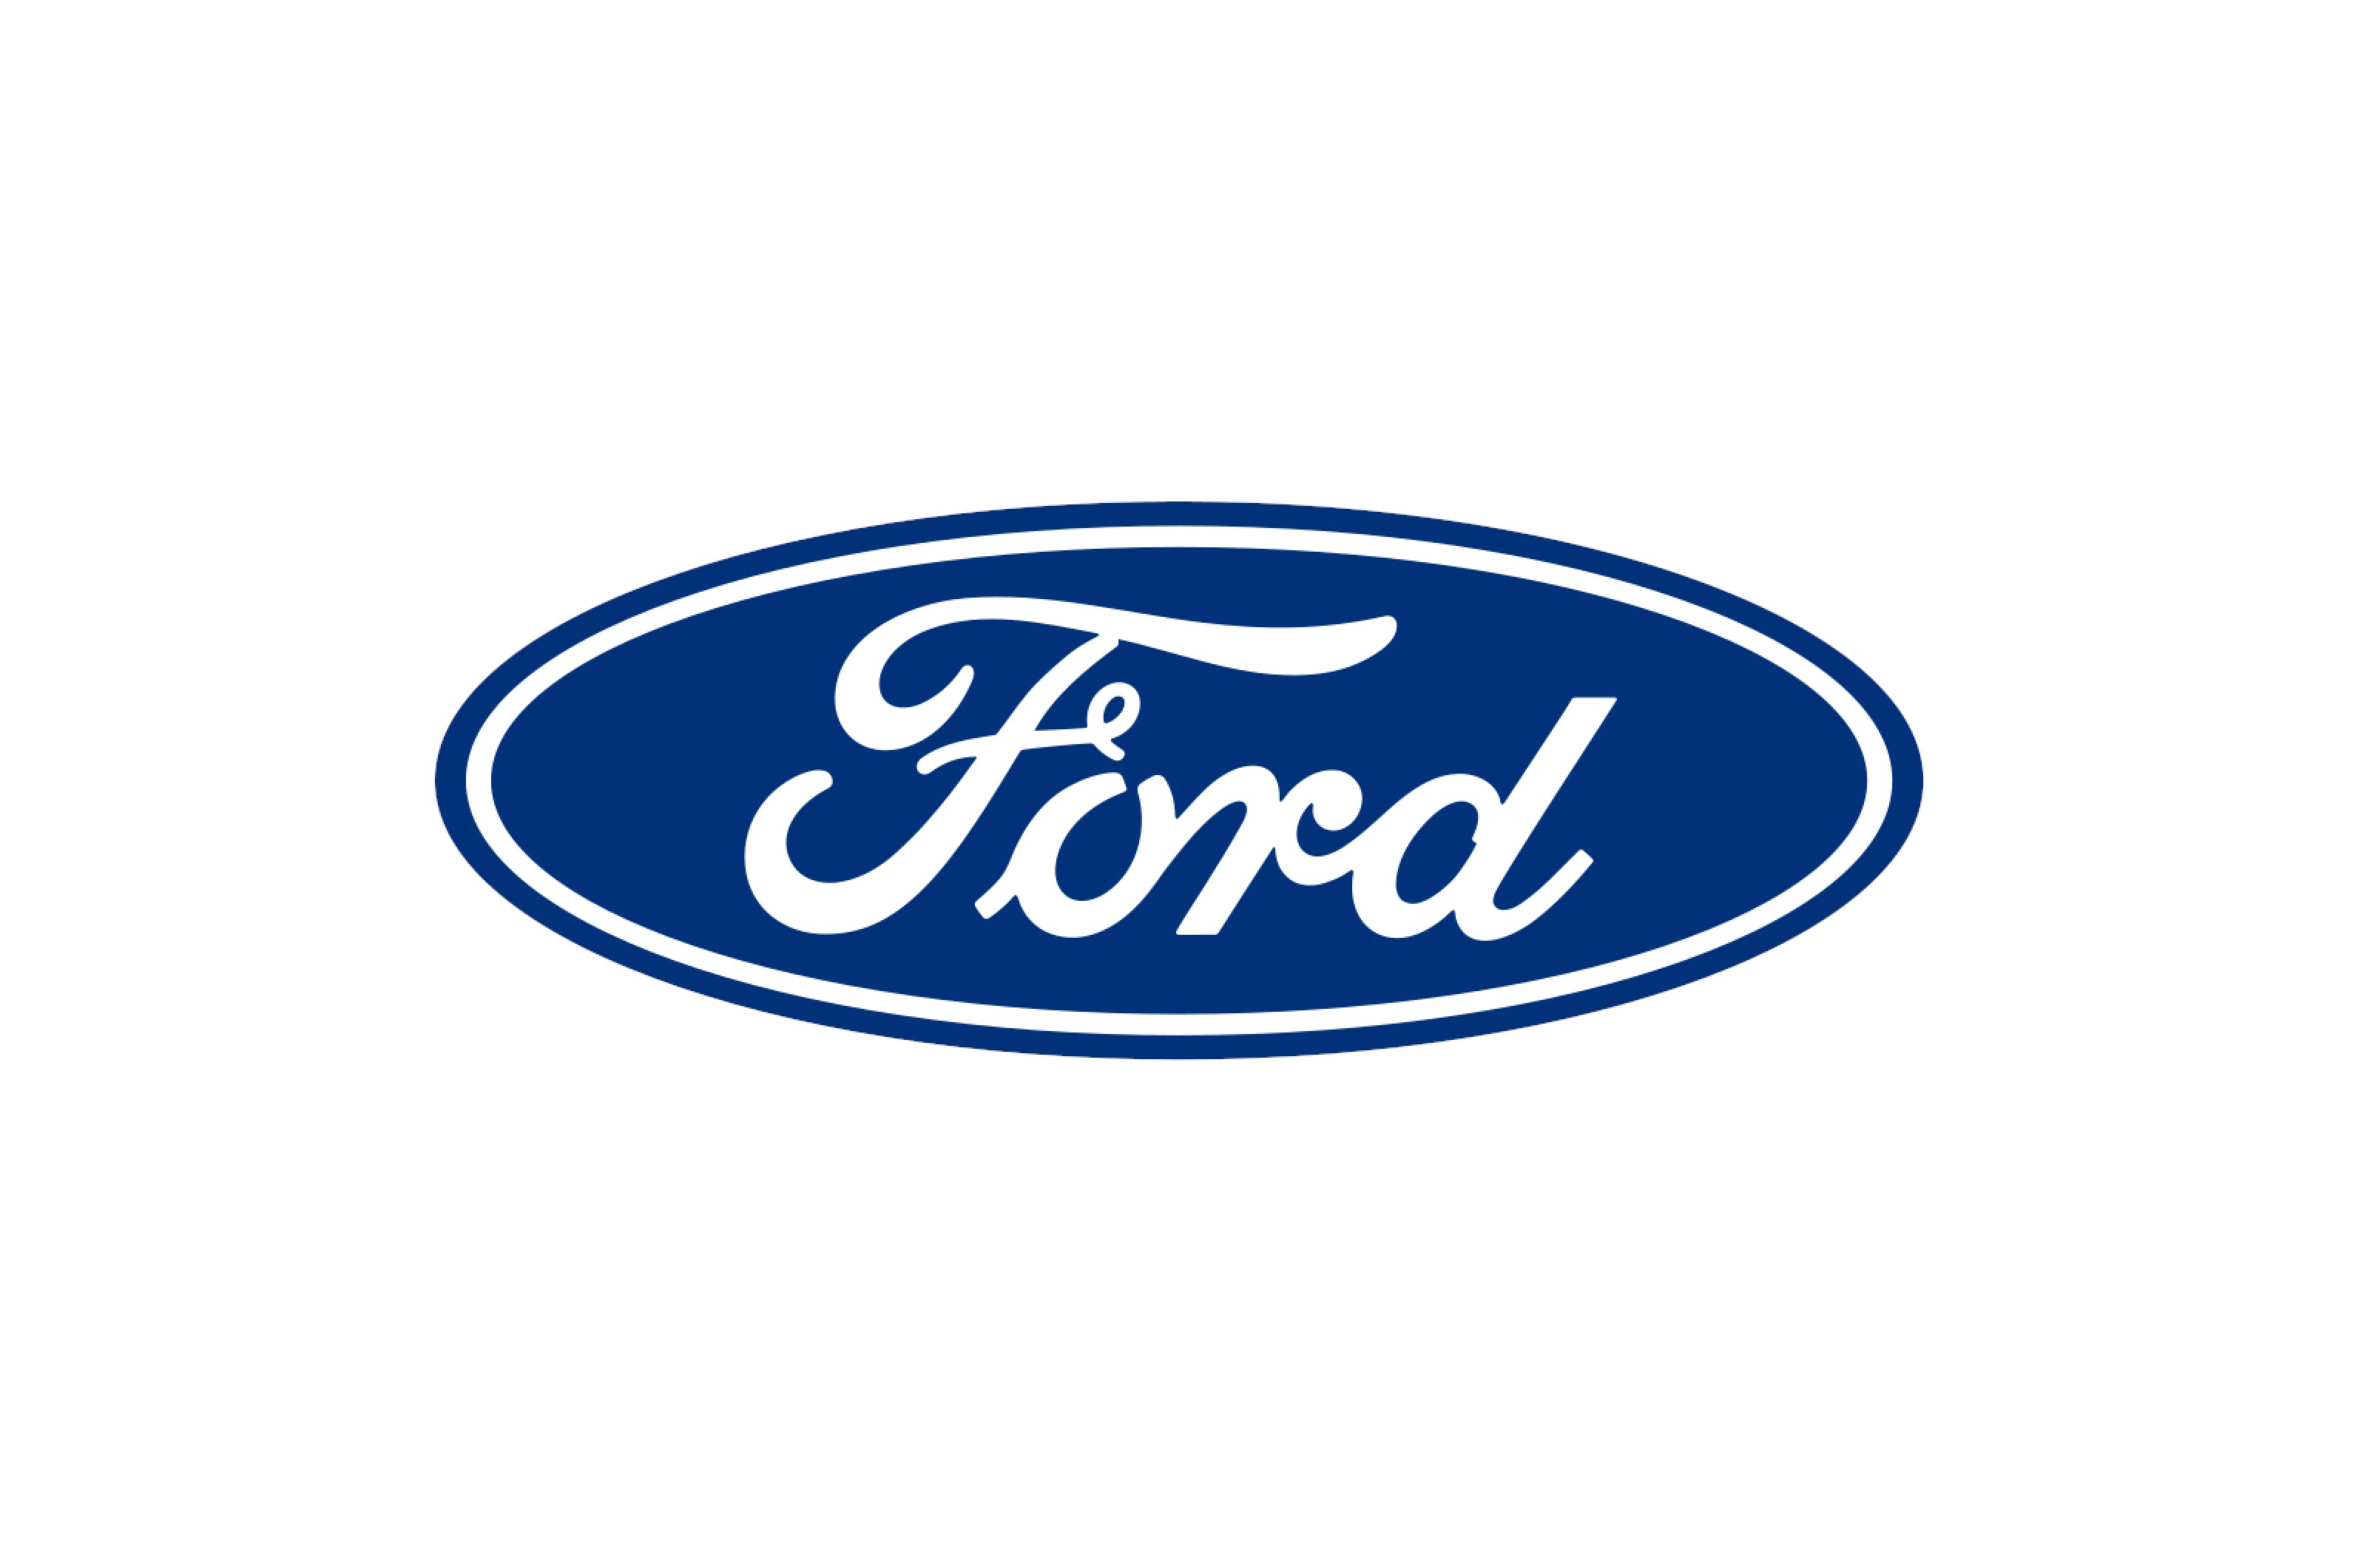 <p>The single word on the Ford logo is a modified but reasonably accurate version of founder Henry Ford’s own signature.</p>  <p>It first appeared, underlined, in 1909, six years after the company was created. Two years after that, the underlining was removed and the word was encased in an oval for the first time.</p>  <p>In 1927, the background of the oval became blue, as it remains today. The oval became slimmer 30 years later.</p>  <p>There have been few changes since. The logo gradually took on a more three-dimensional look until 2017, when – following a general trend in the industry – it was flattened again.</p>